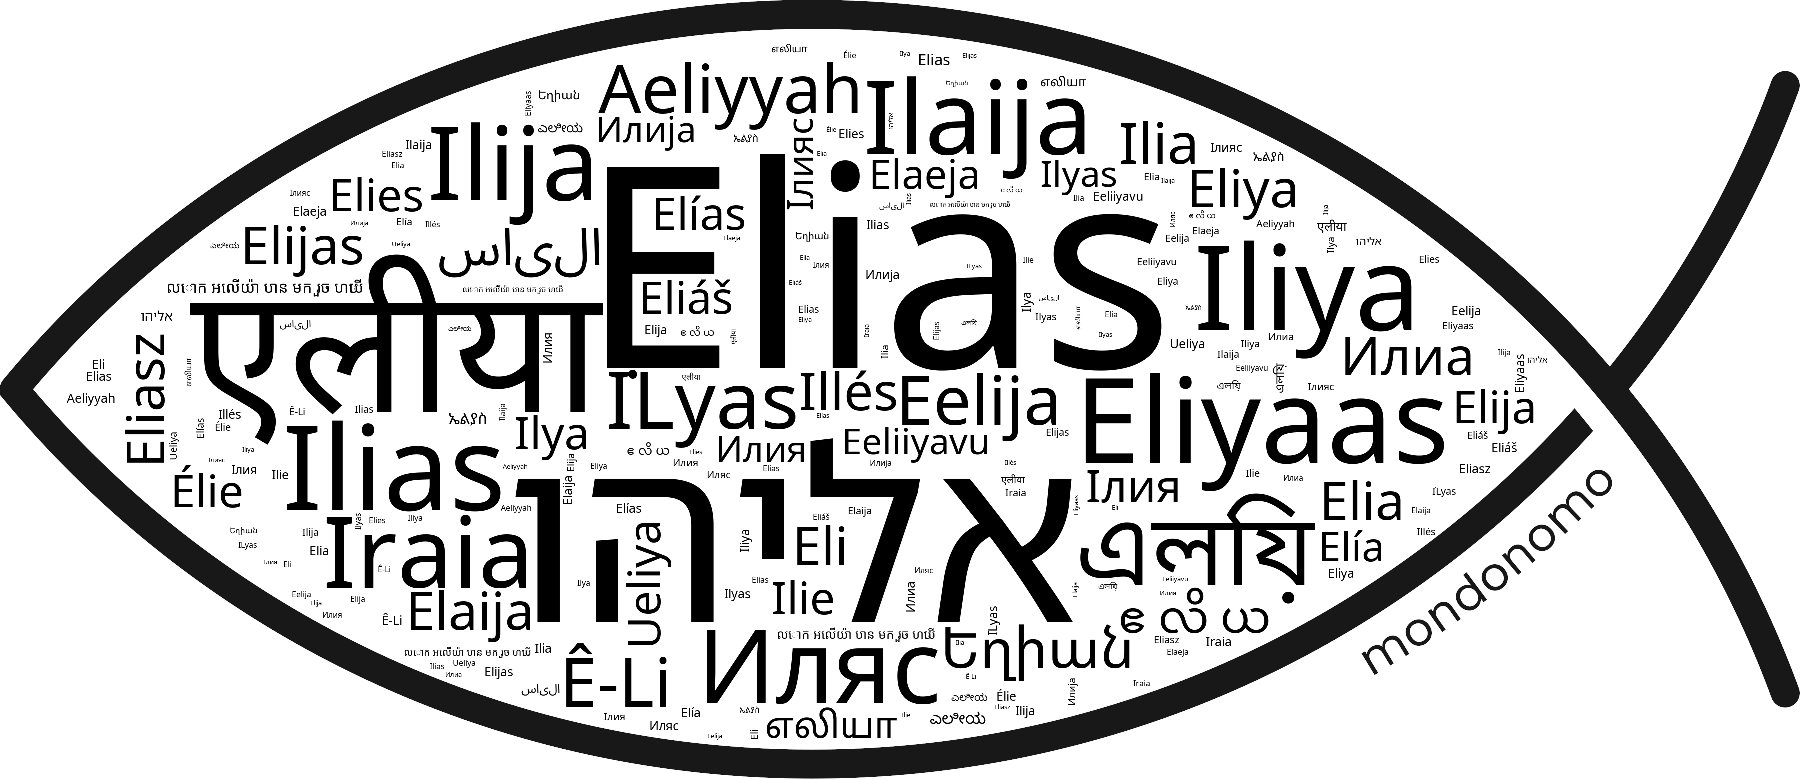 Name Elias in the world's Bibles